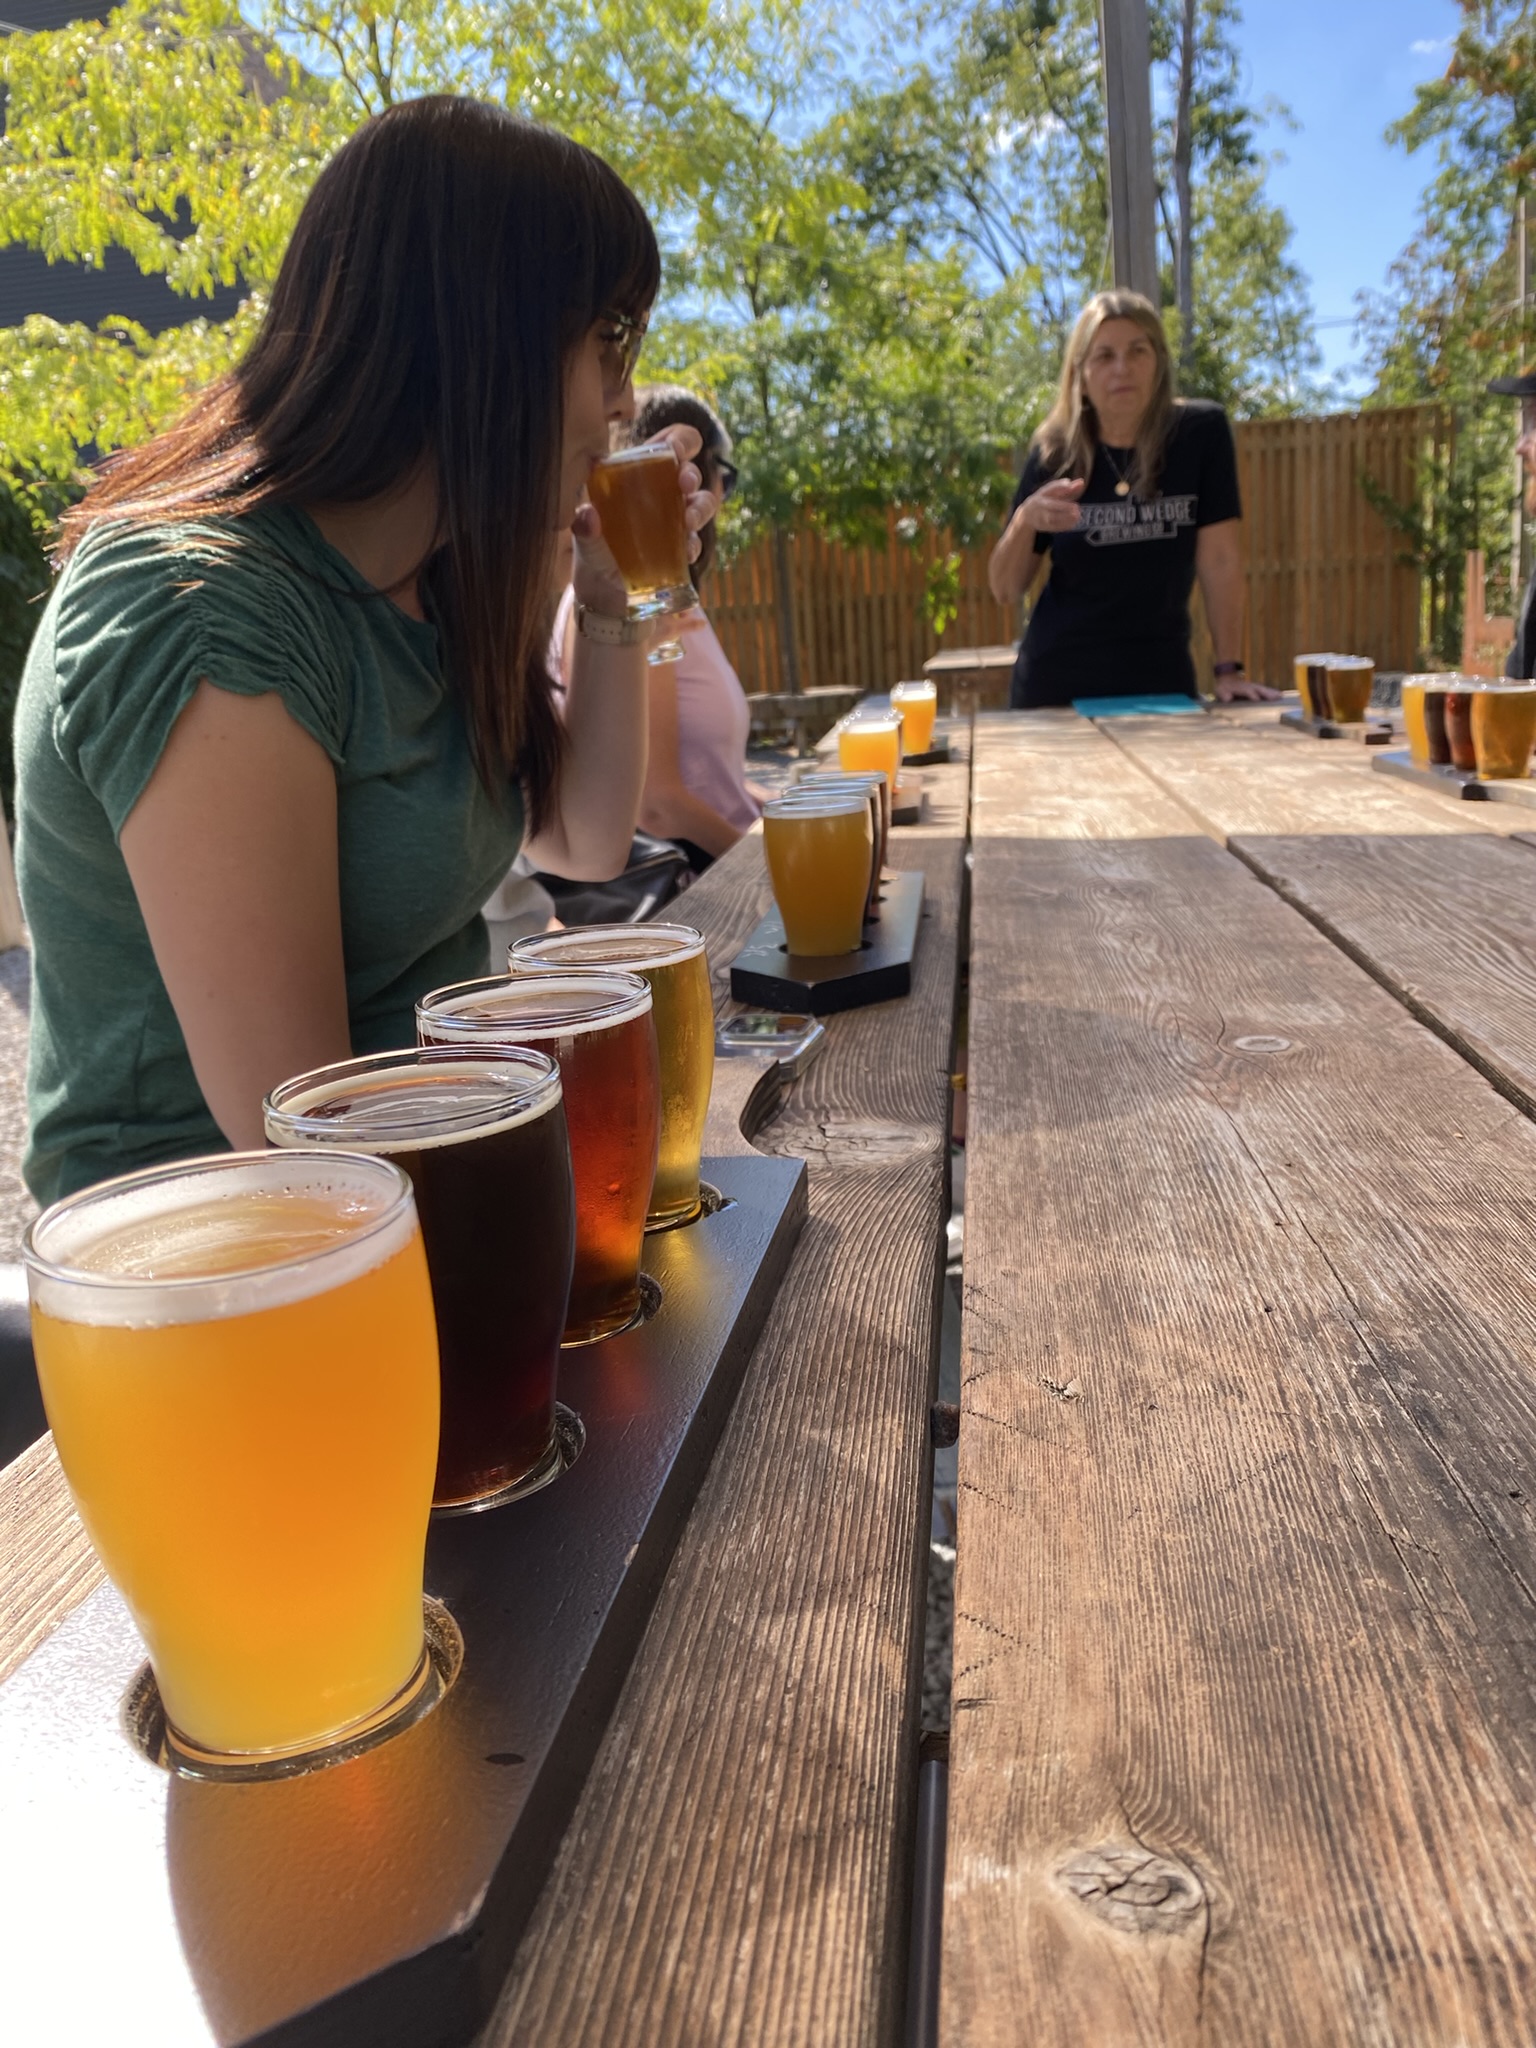 Summer beer tasting at The Second Wedge Brewery in Uxbridge Ontario. Part of Rural Route Tour Company's Sideroad Sippers Tour.